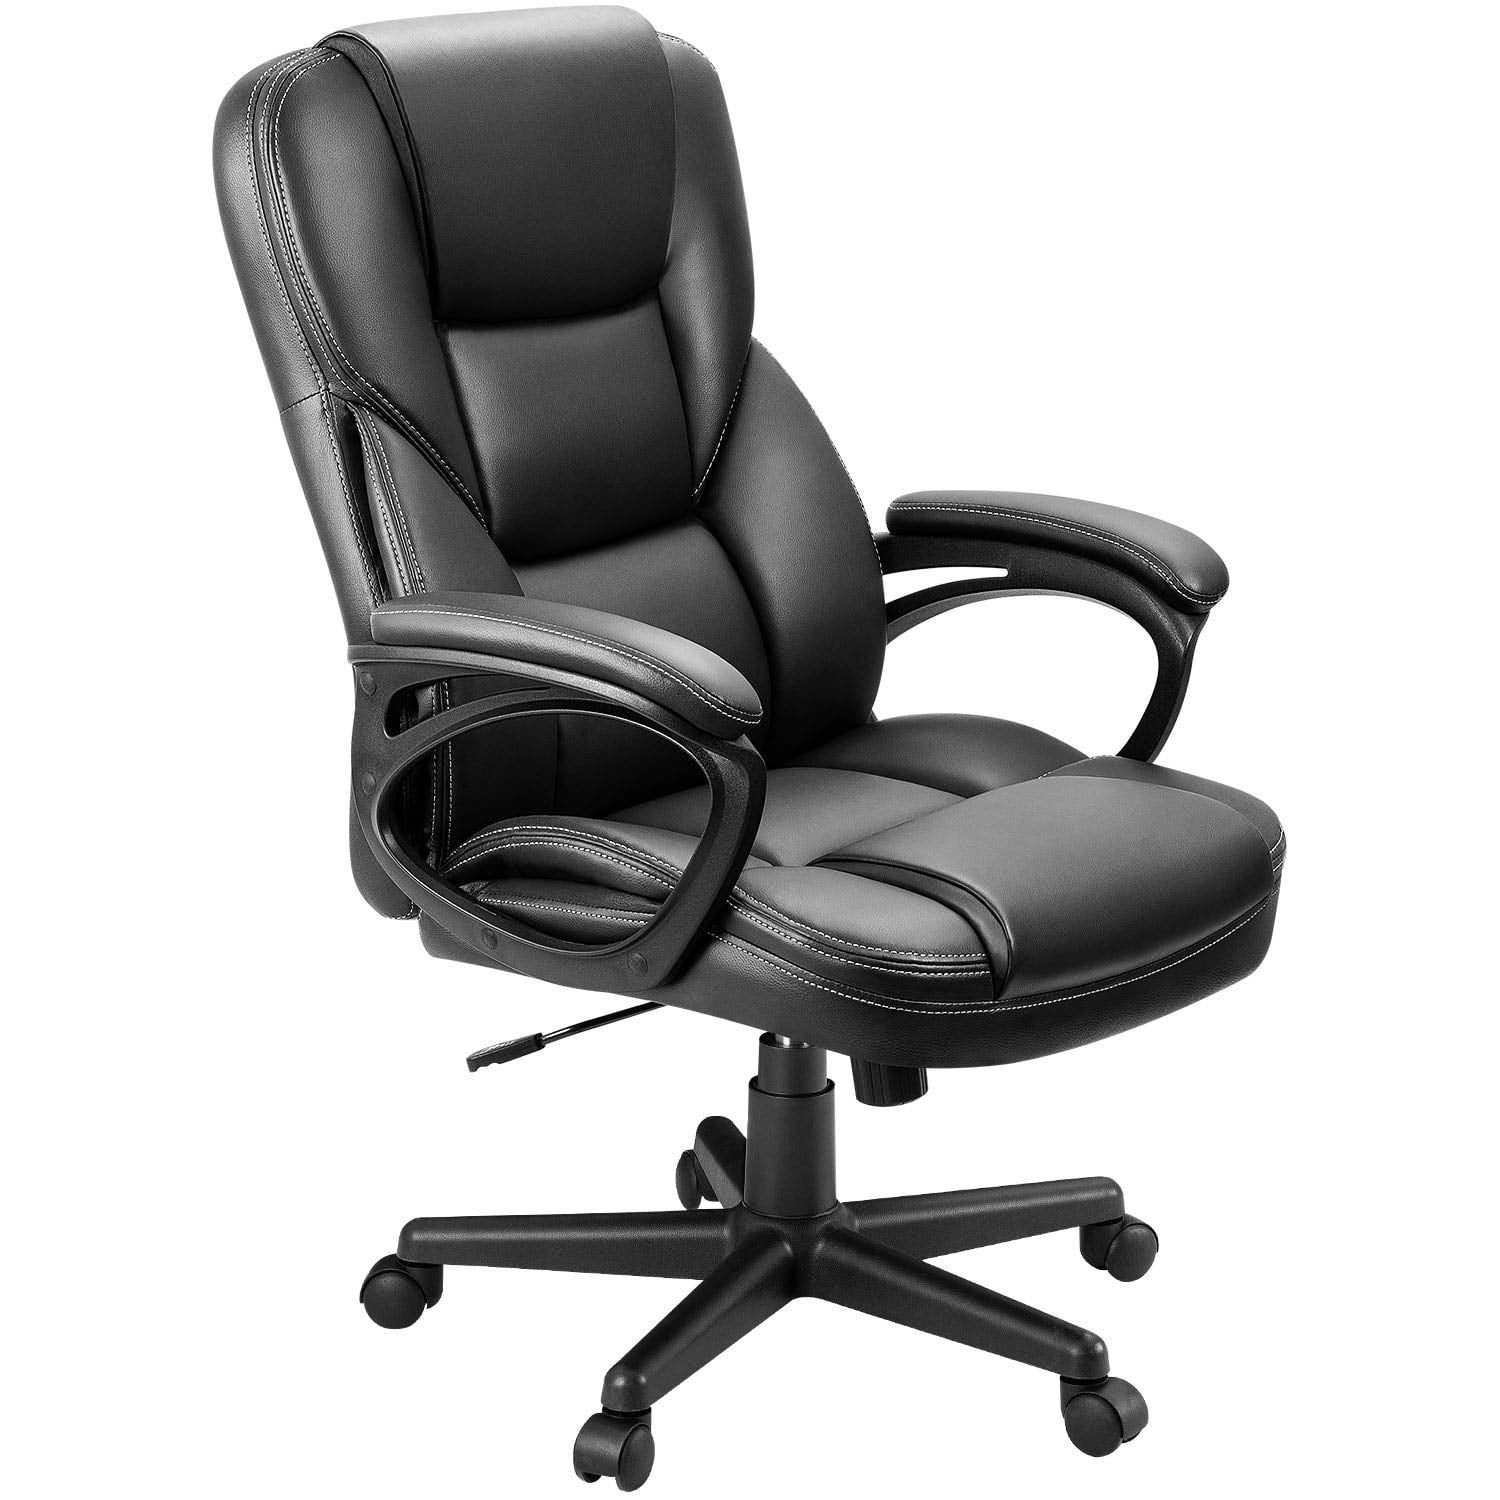 Executive Chair Ergonomic Computer Chair PU Leather High Back Office Desk Chair 